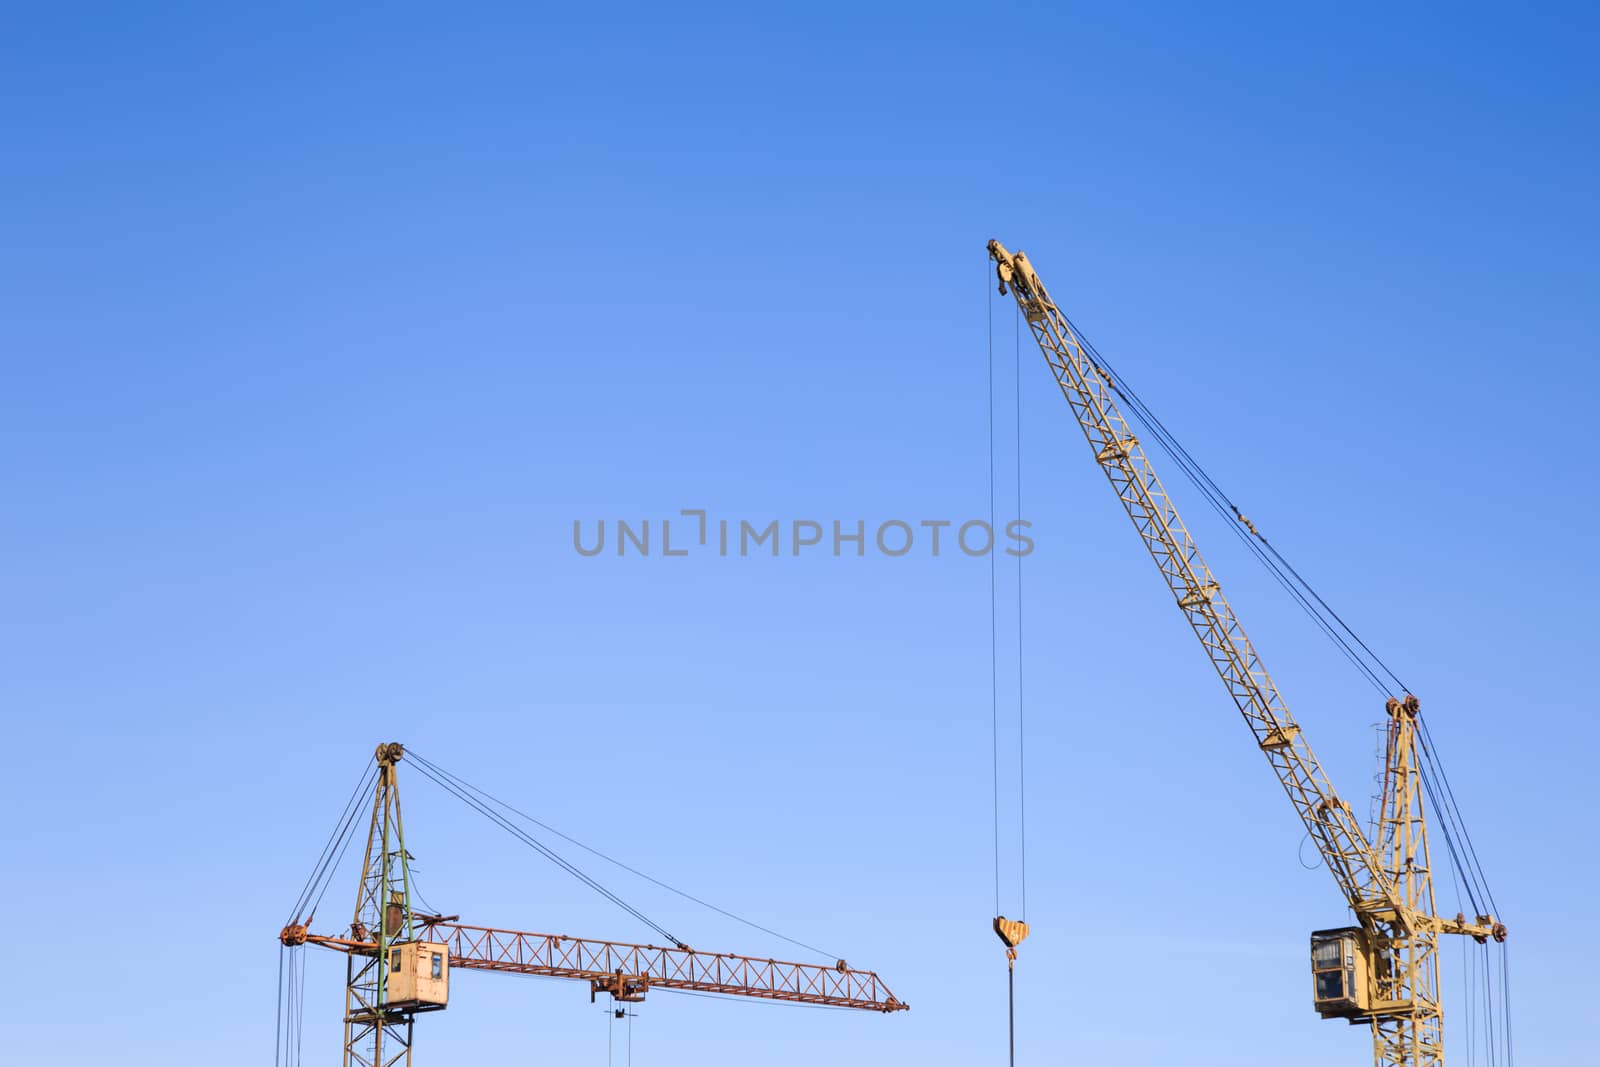 Front distant view of two cranes on a light blue sky background. Construction site